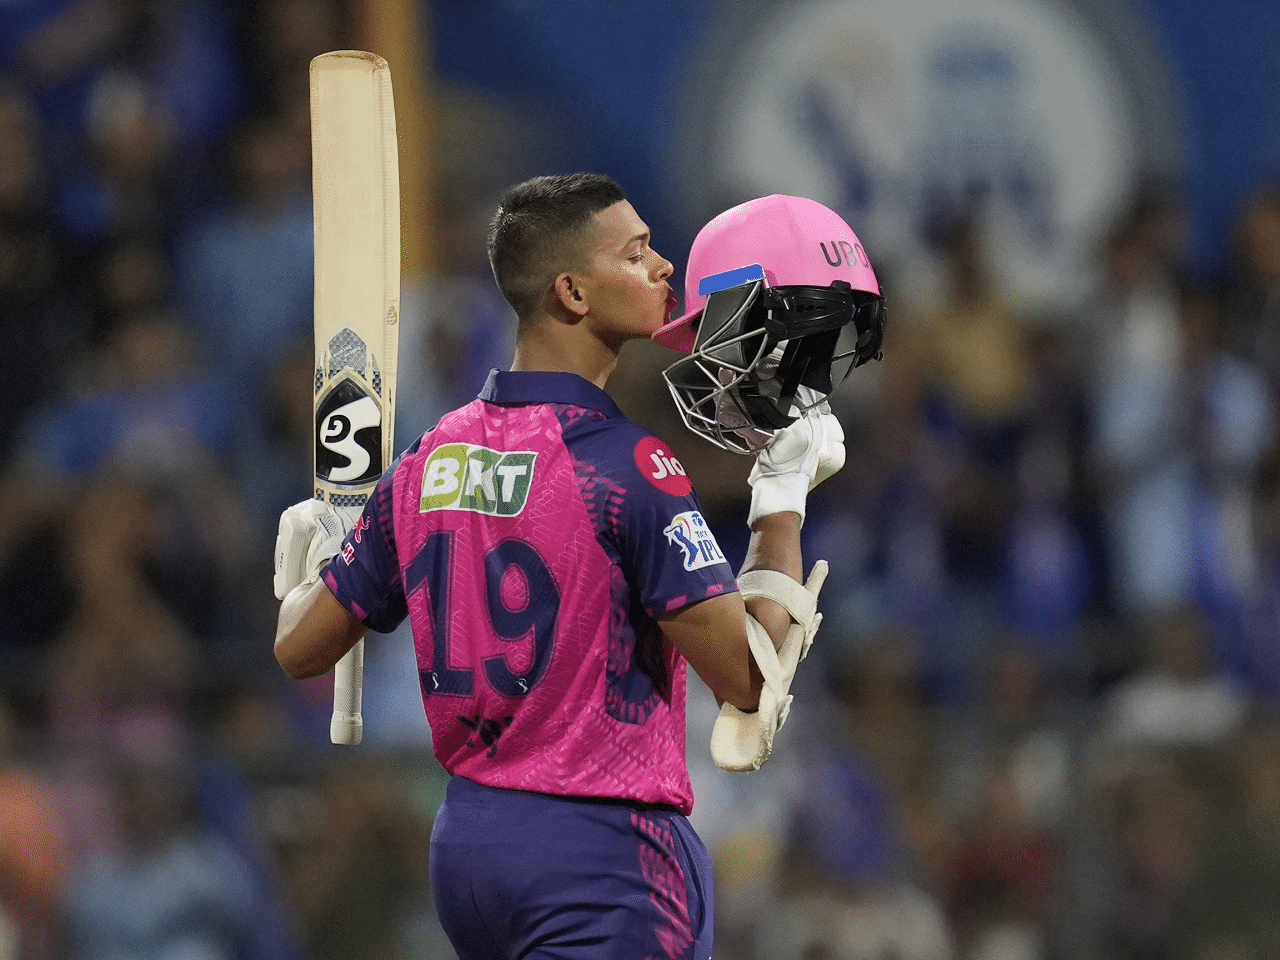 ‘Yashasvi Jaiswal will score hundreds for India’: Michael Vaughan lauds RR batter after his maiden IPL ton